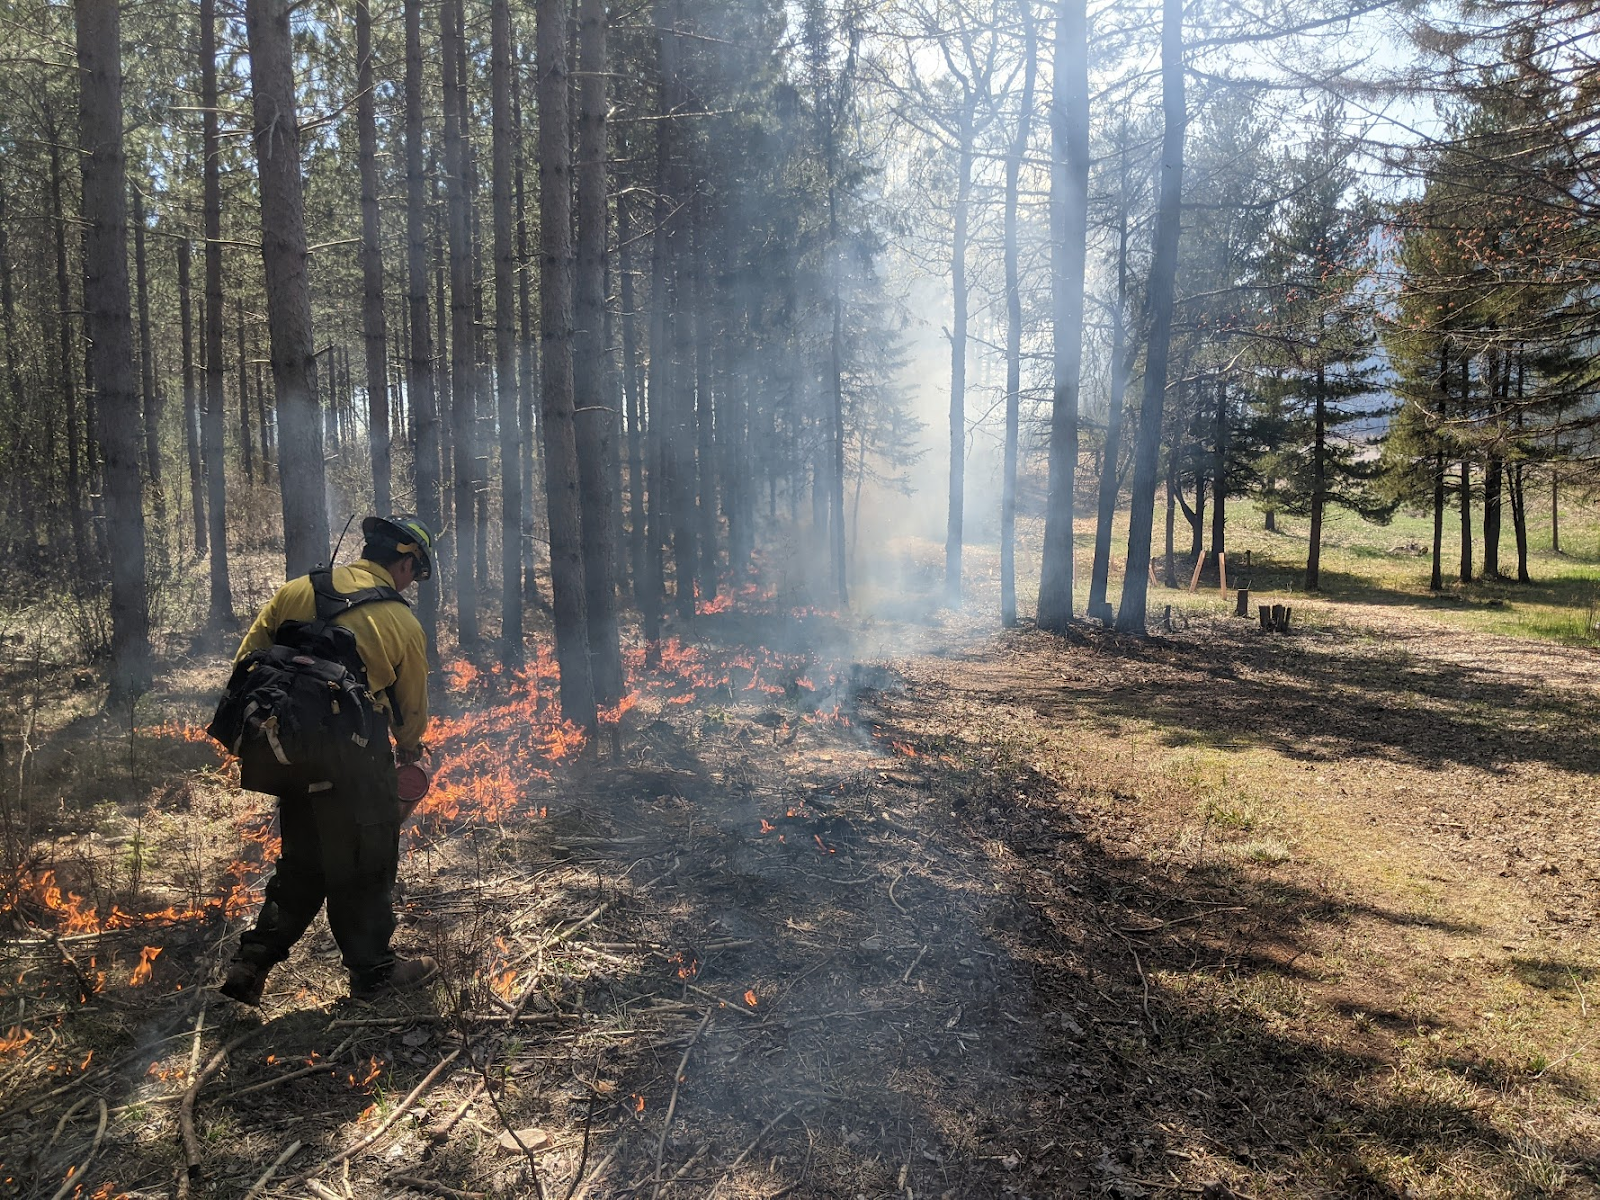 A prescribed fire steward ignites understory fuels along the northwest burn unit perimeter. Photo by Kyle Gill, May 17, 2022.